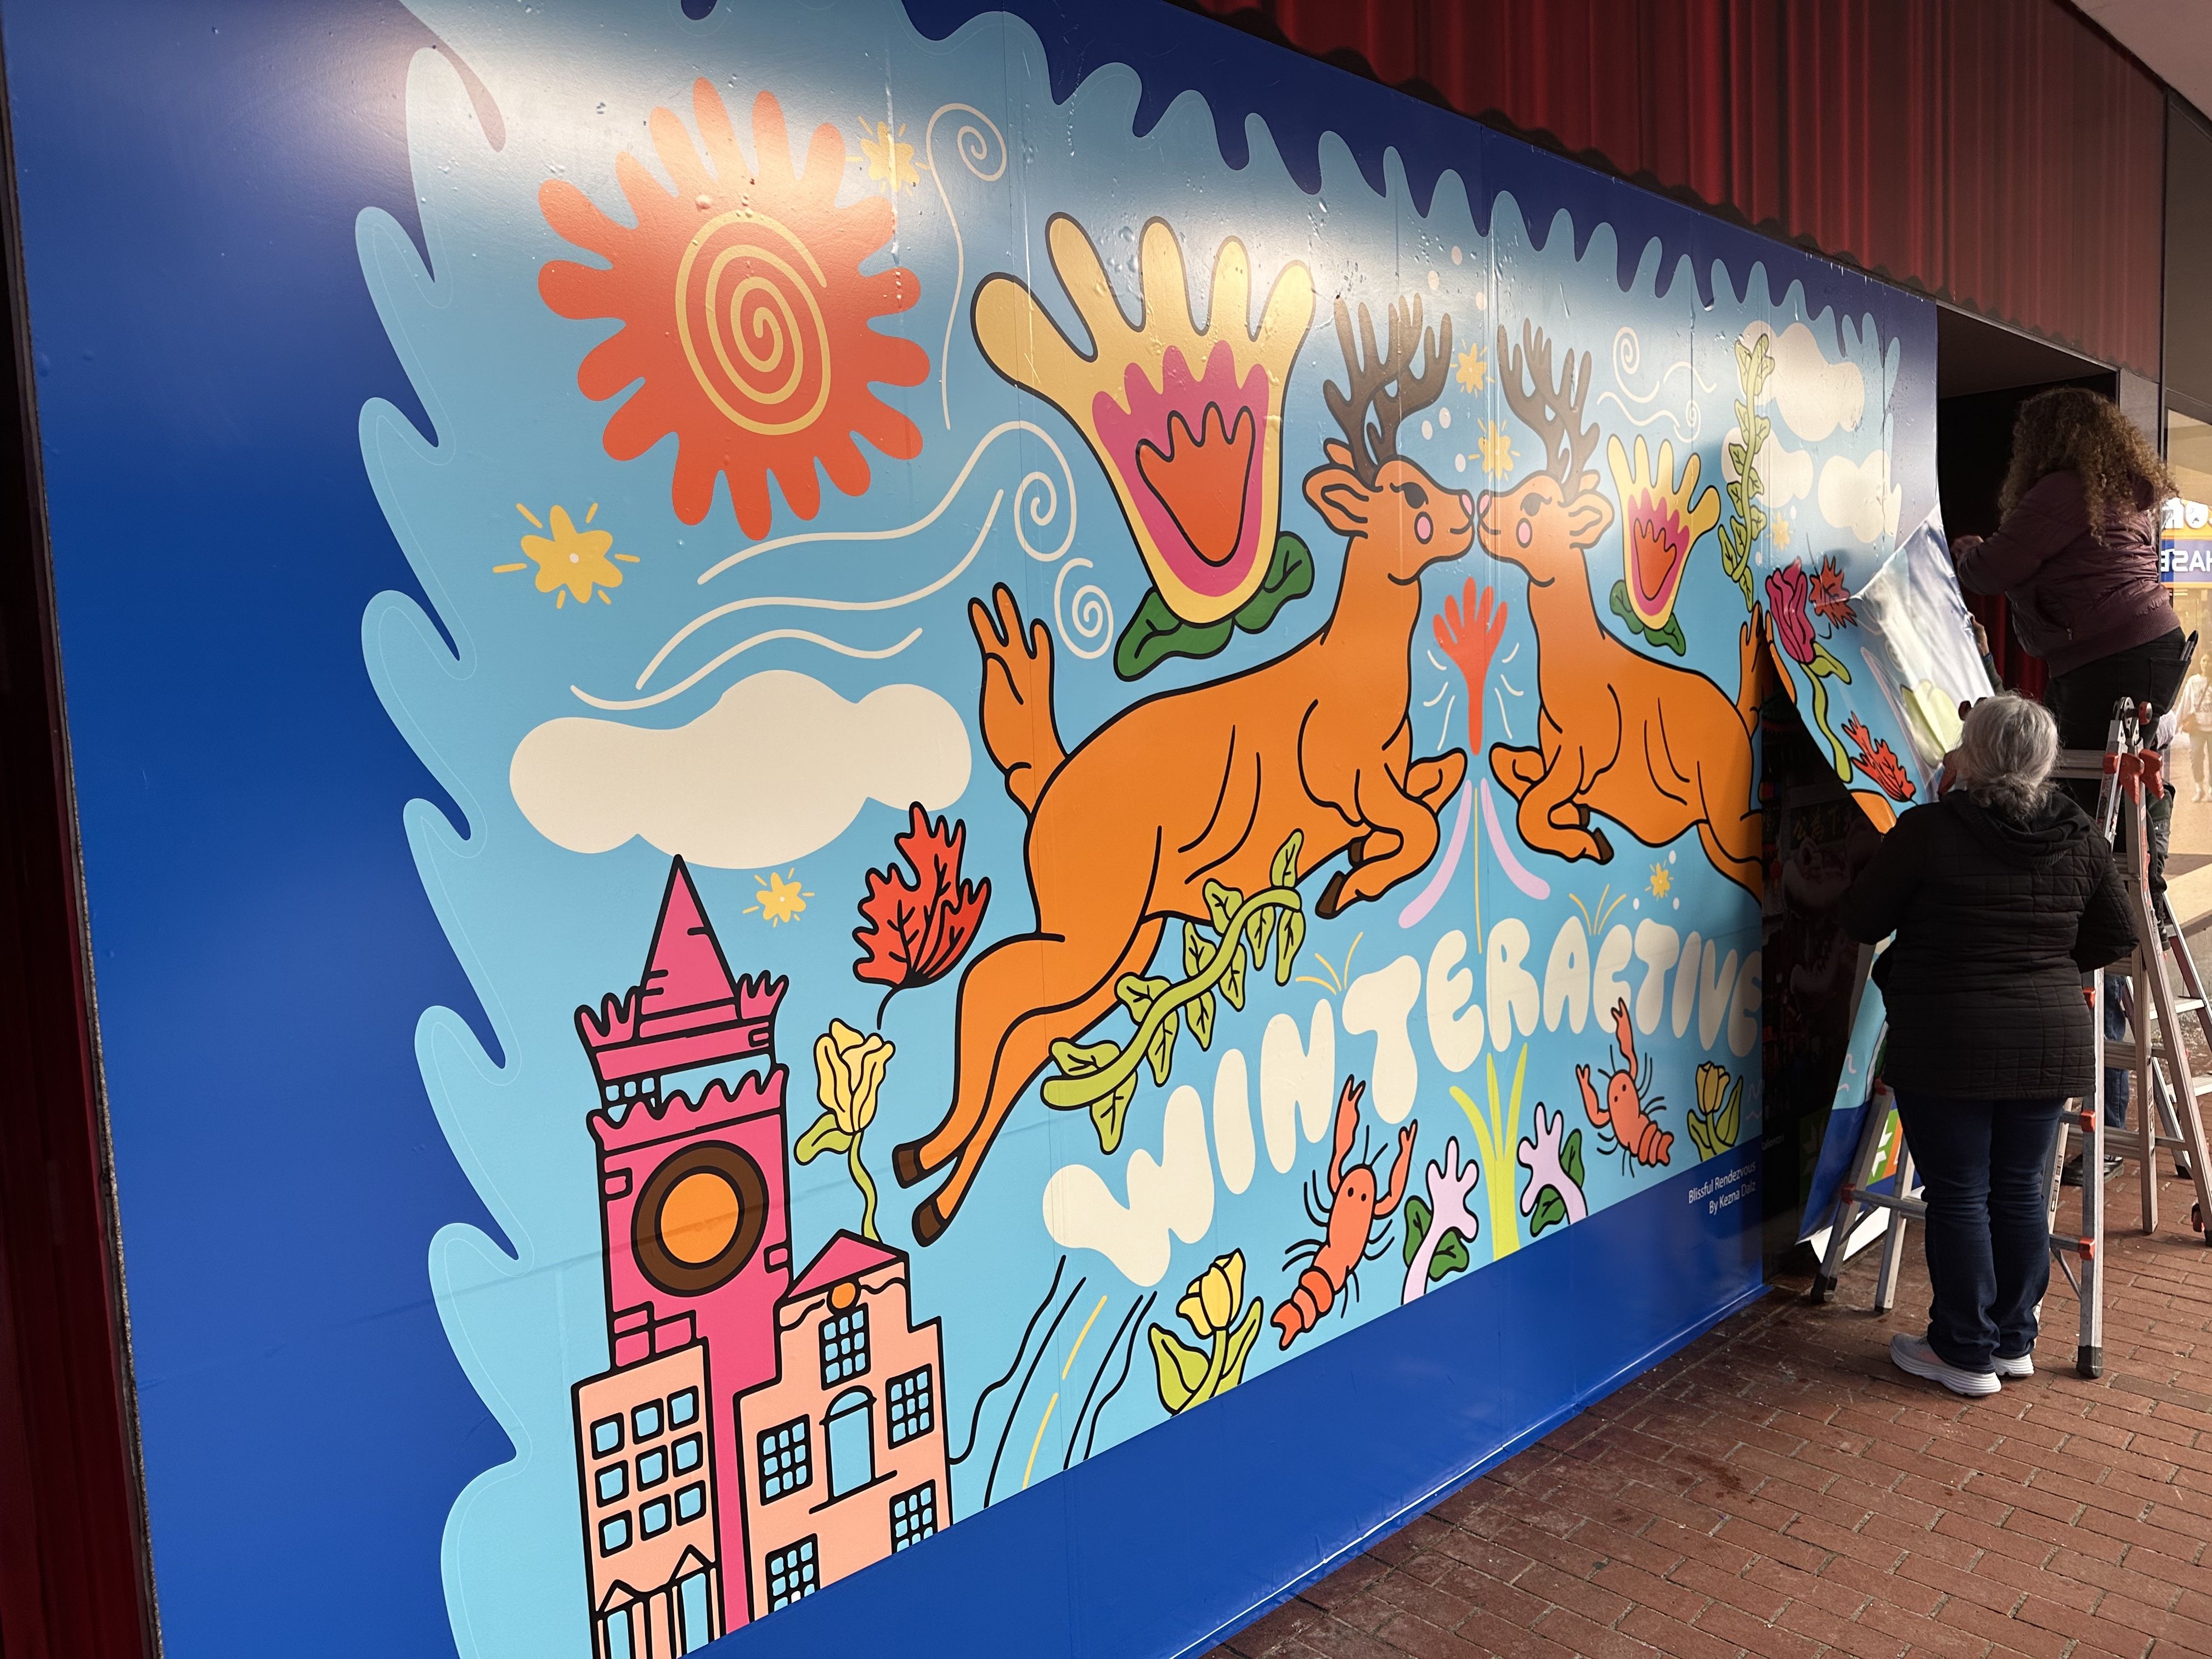 One person on a ladder and another on the ground set up and seal pieces of a colorful mural that says "winteractive" and shows two deer kissing